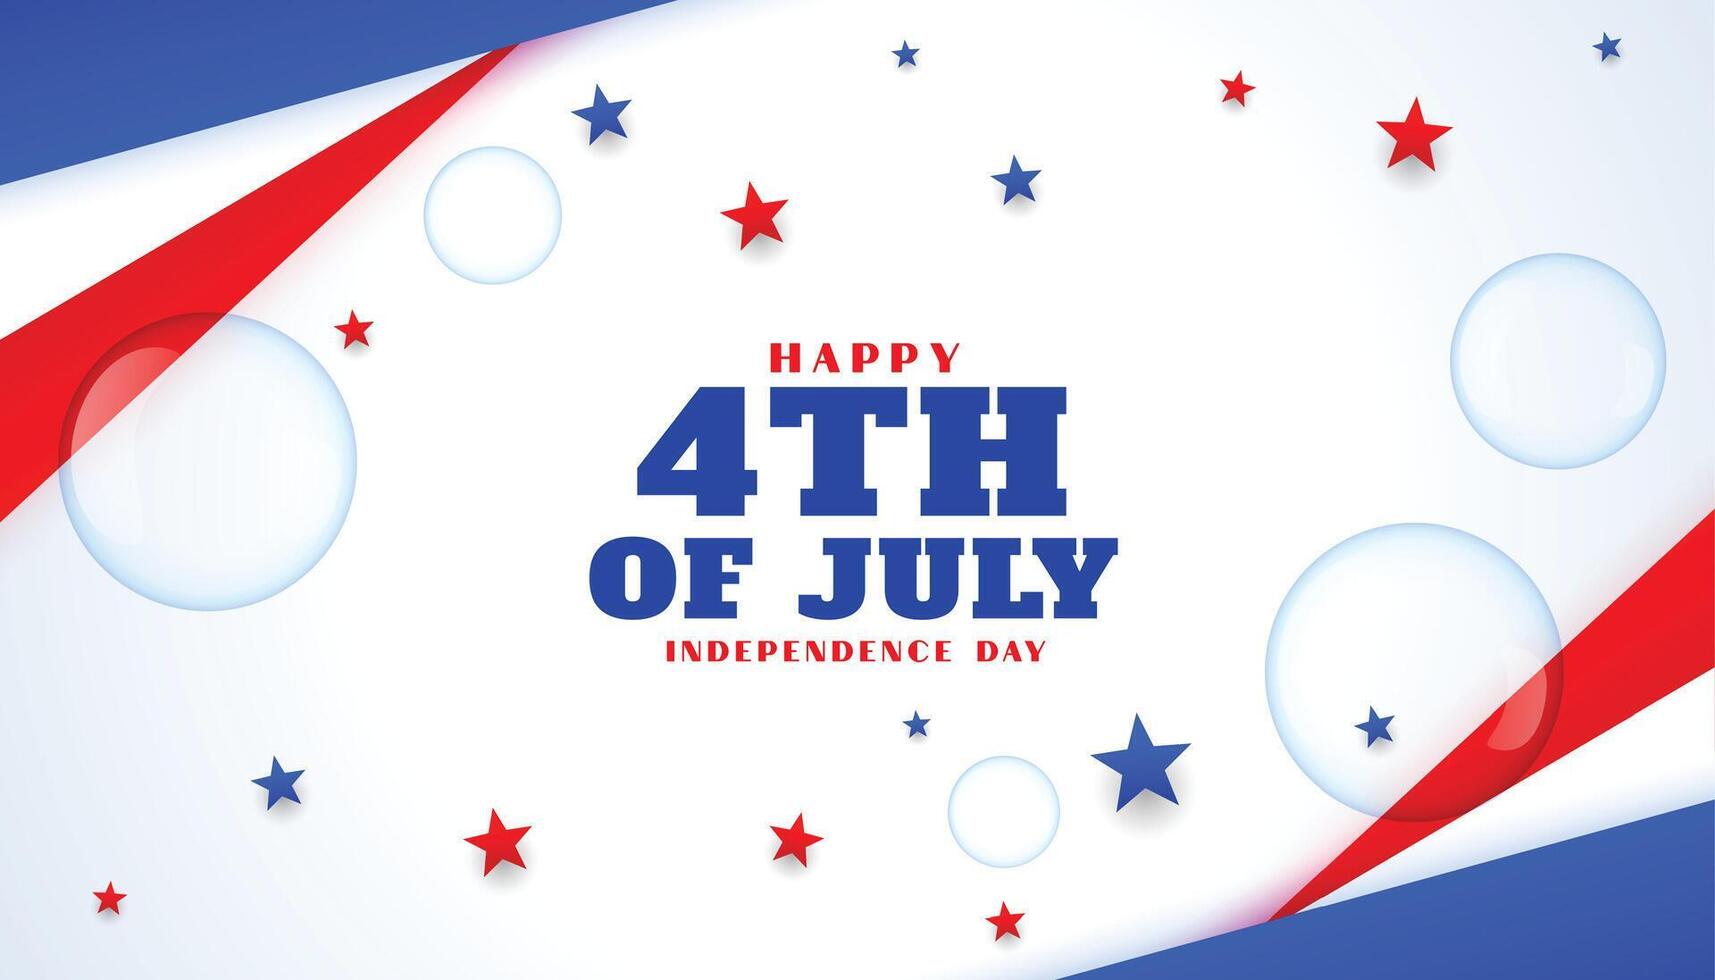 happy fourth of july independence day on bubble style background vector